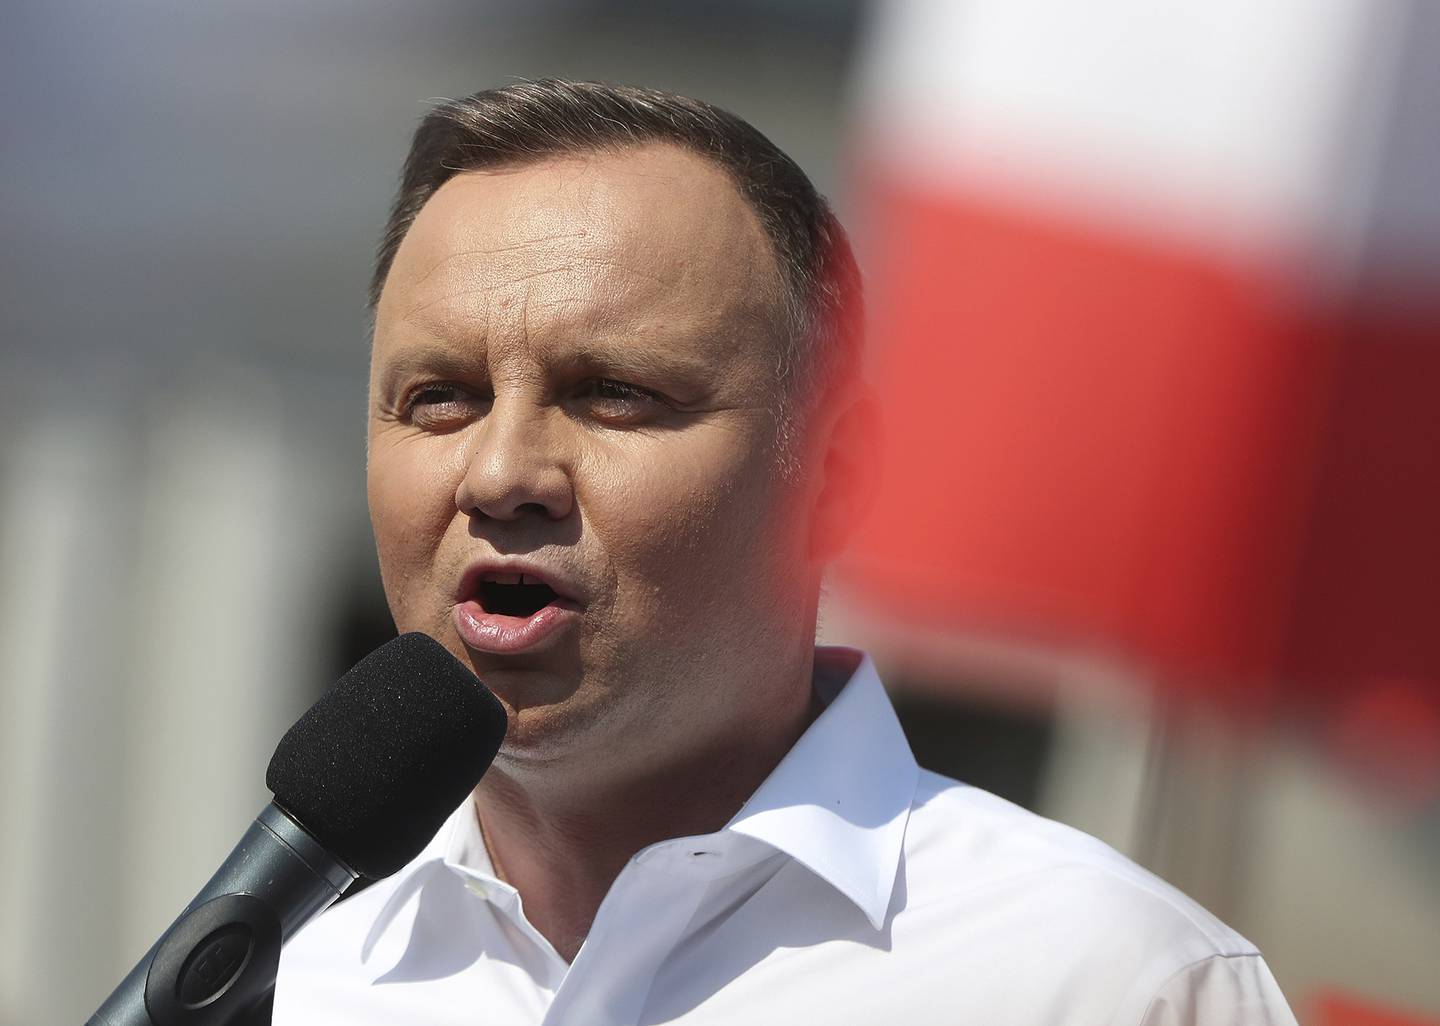 Polish President Andrzej Duda speaks to a crowd as he campaigns ahead of a presidential election later in this month, in Plonsk, Poland, on June 16, 2020.